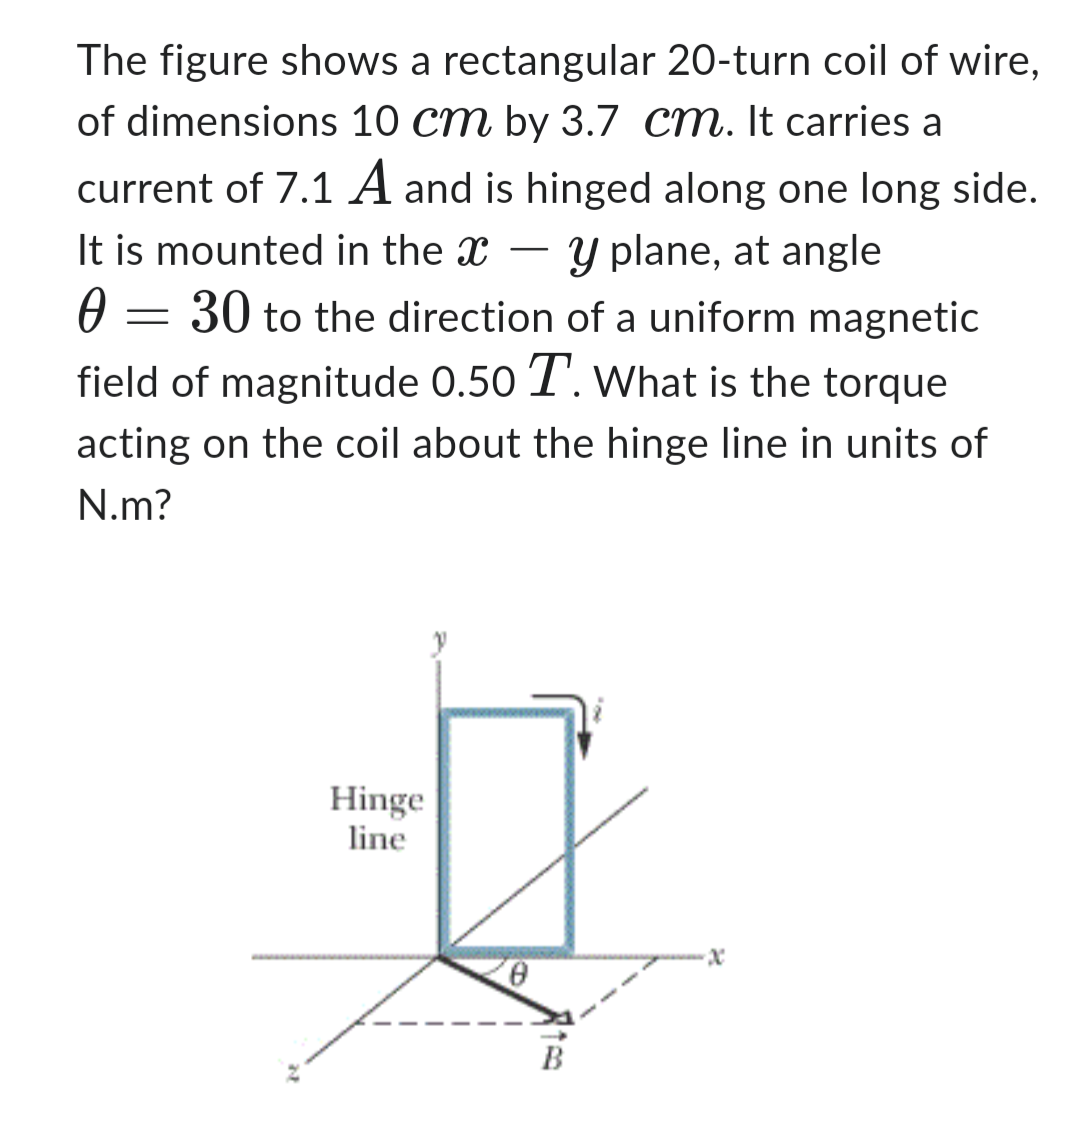 The figure shows a rectangular 20-turn coil of wire,
of dimensions 10 cm by 3.7 cm. It carries a
current of 7.1 A and is hinged along one long side.
y plane, at angle
30 to the direction of a uniform magnetic
field of magnitude 0.50 T. What is the torque
acting on the coil about the hinge line in units of
N.m?
It is mounted in the X-
Ө
-
2
Hinge
line
-x